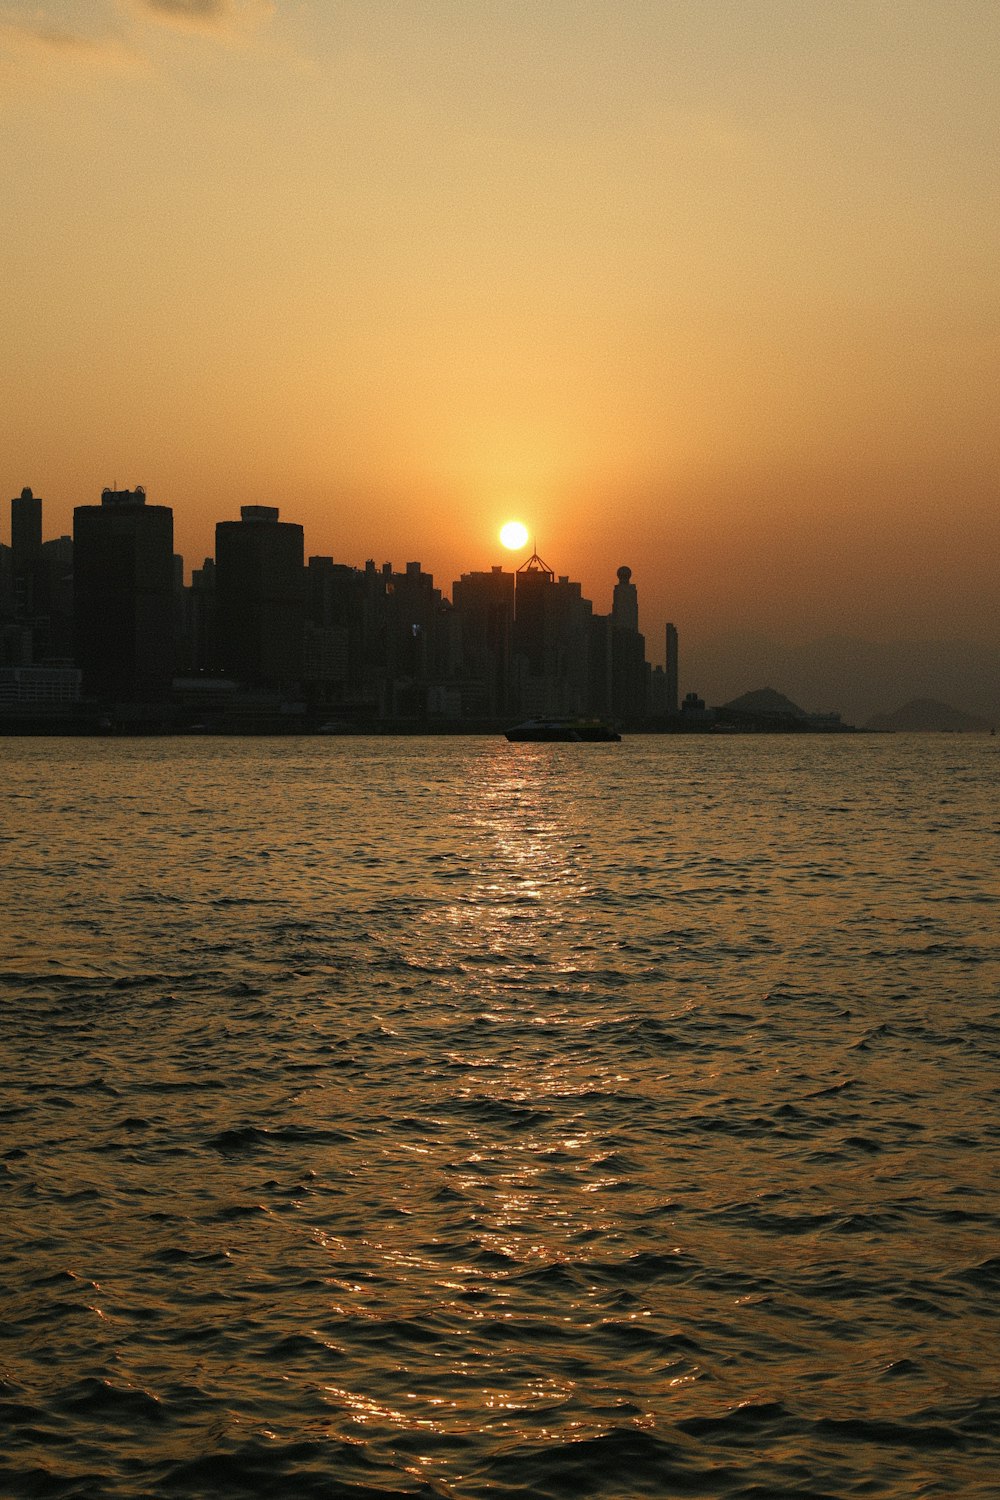 the sun is setting over a city on the water